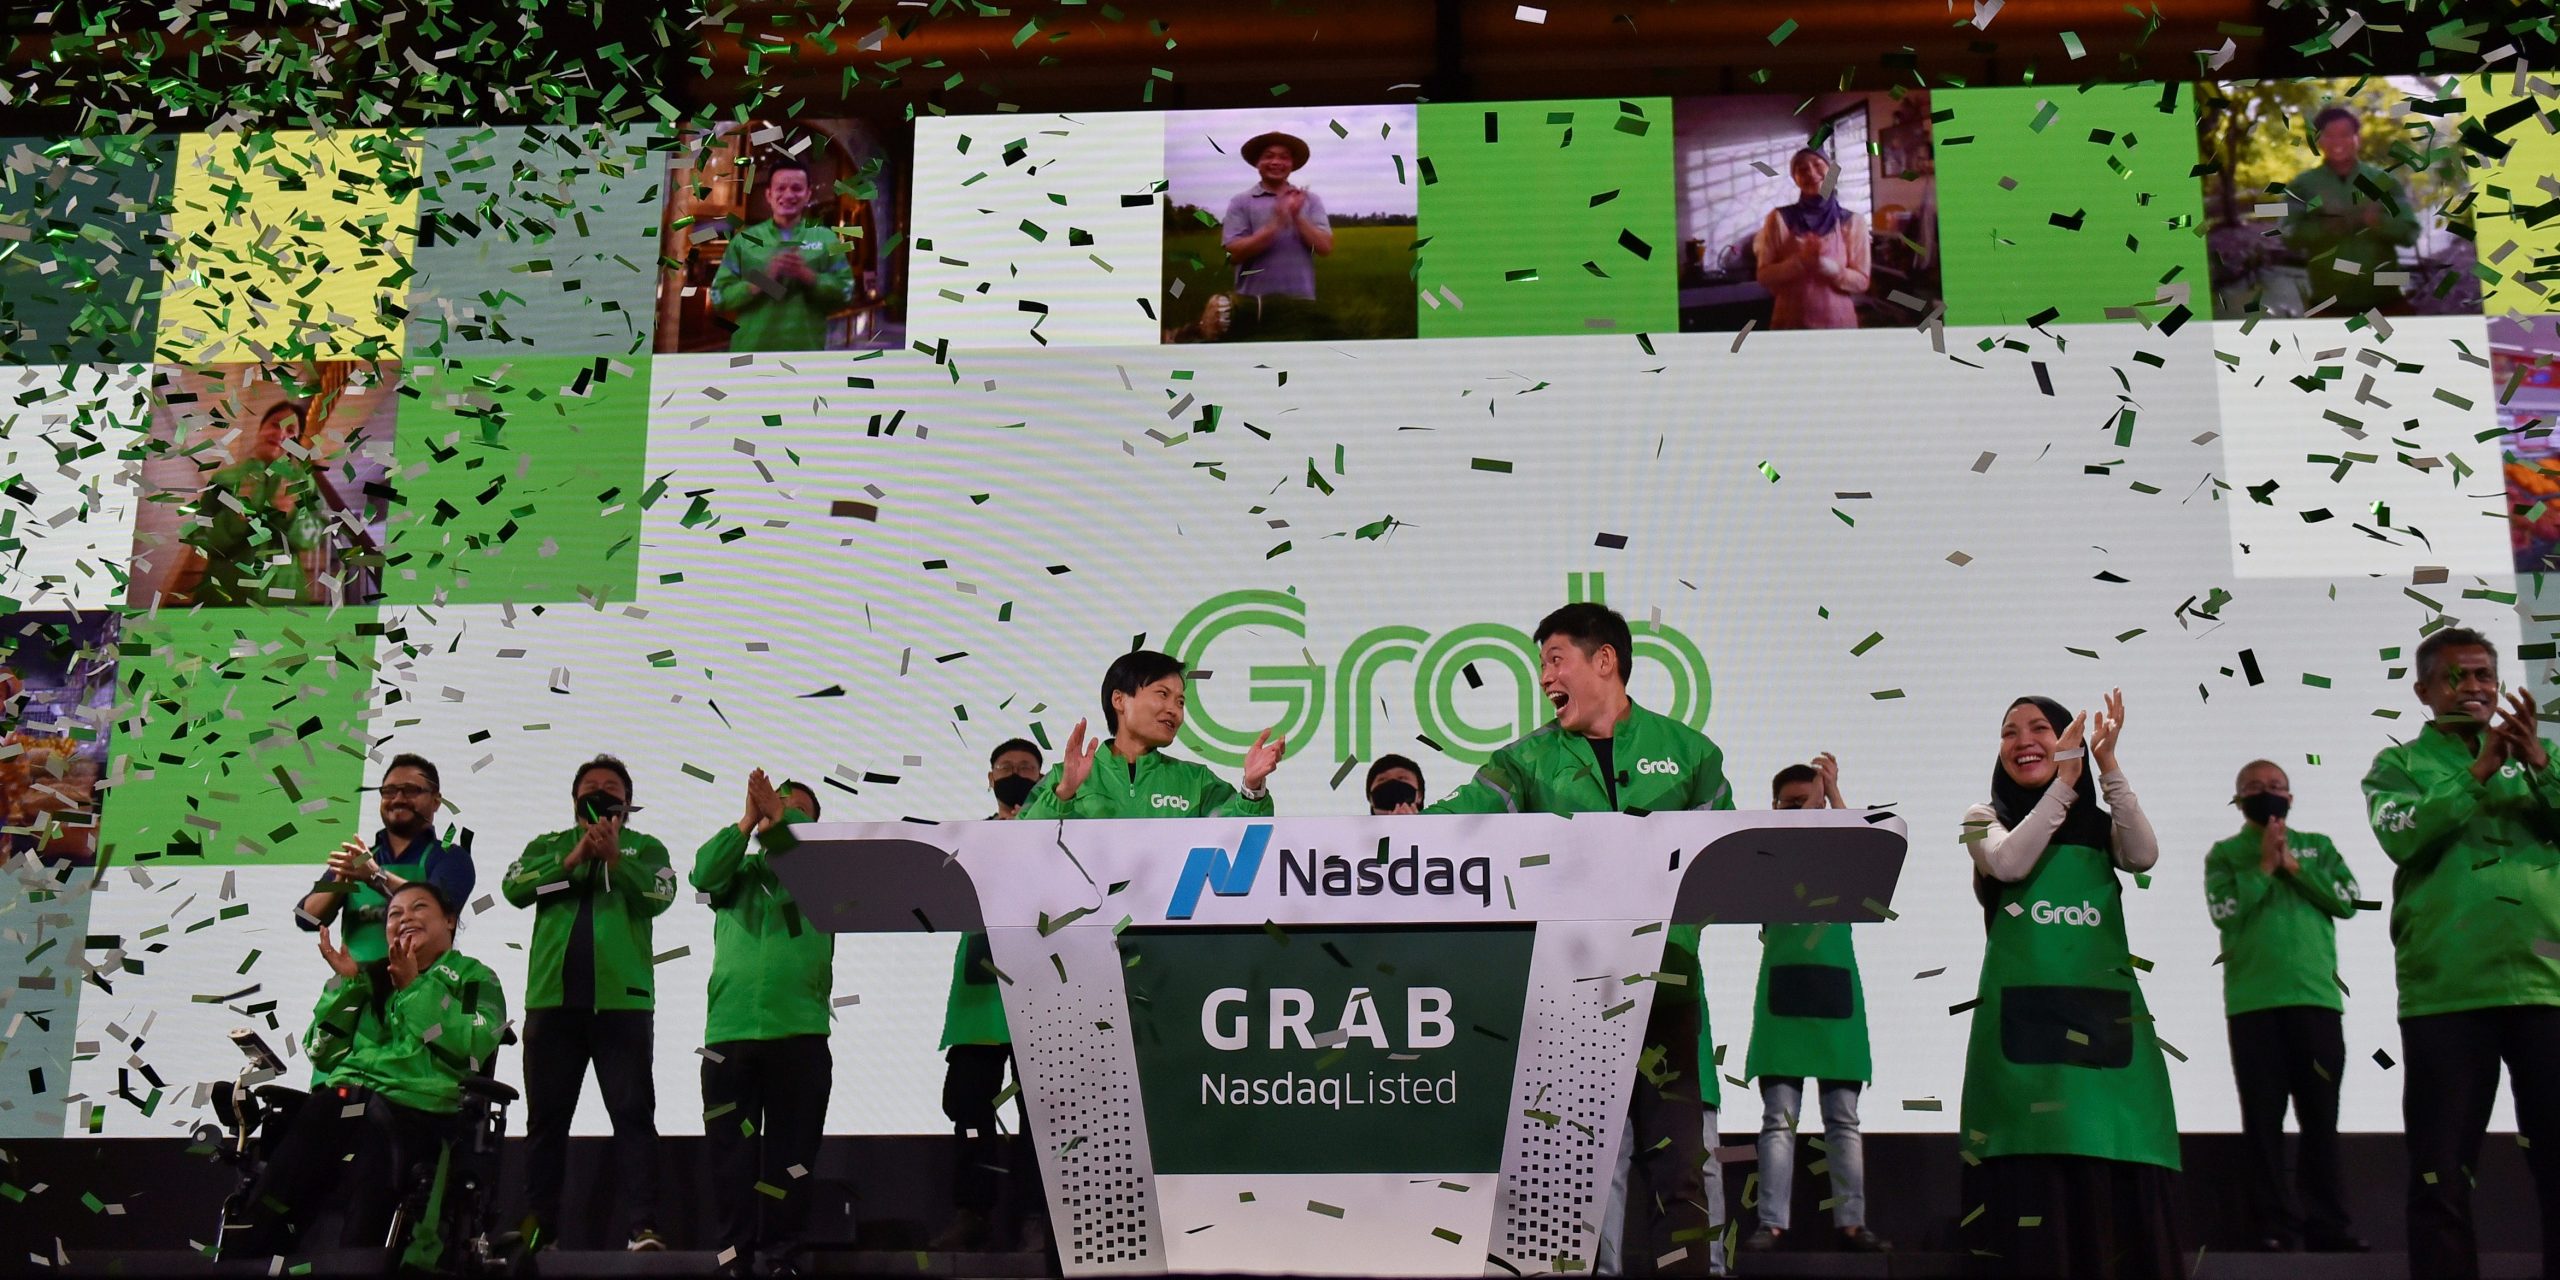 Grab's CEO Anthony Tan and co-founder Tan Hooi Ling celebrate as they attend the Grab Bell Ringing Ceremony at a hotel in Singapore, December 2, 2021.